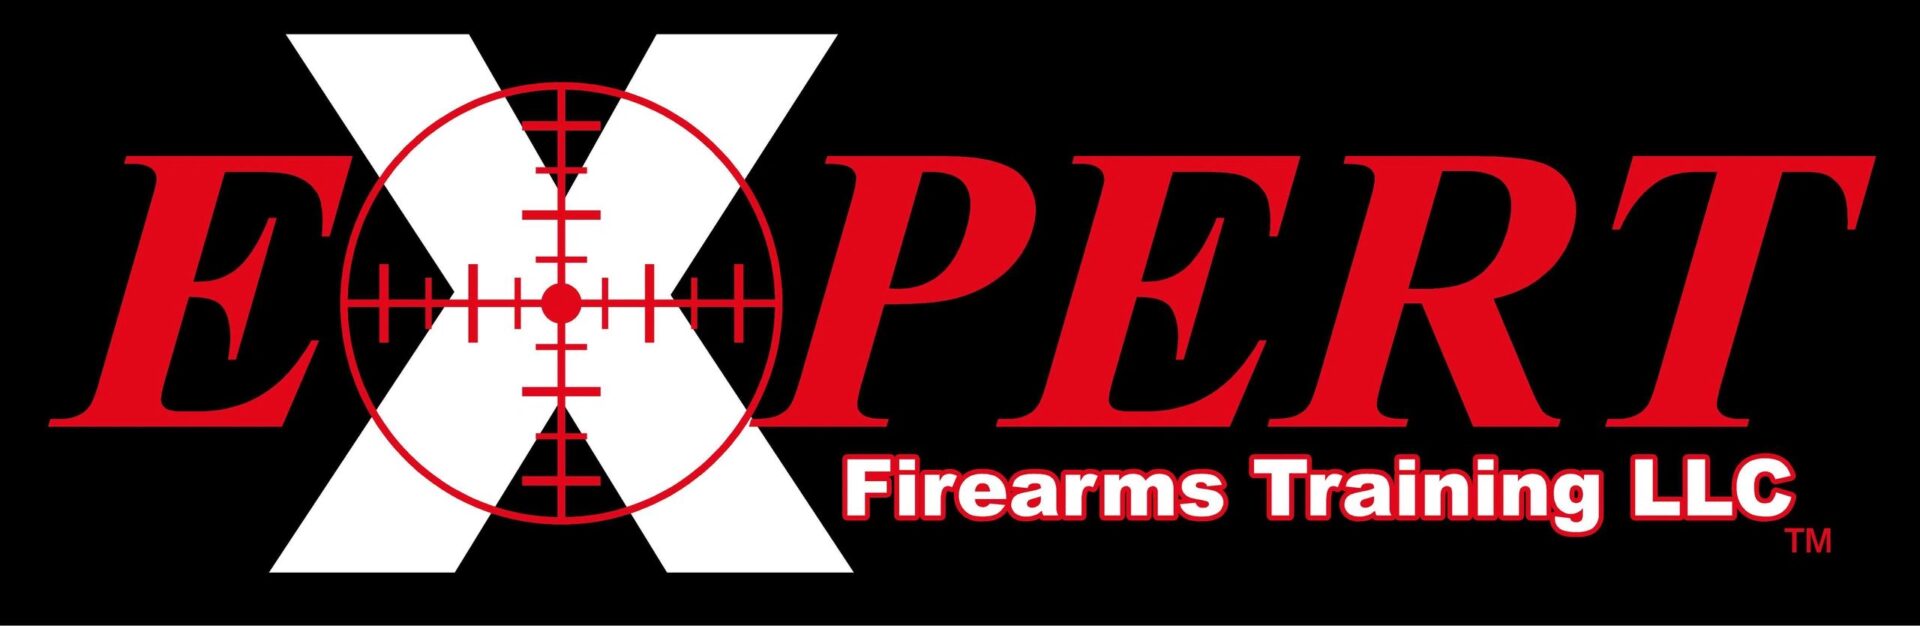 A black and white logo of an x-pen firearms training center.